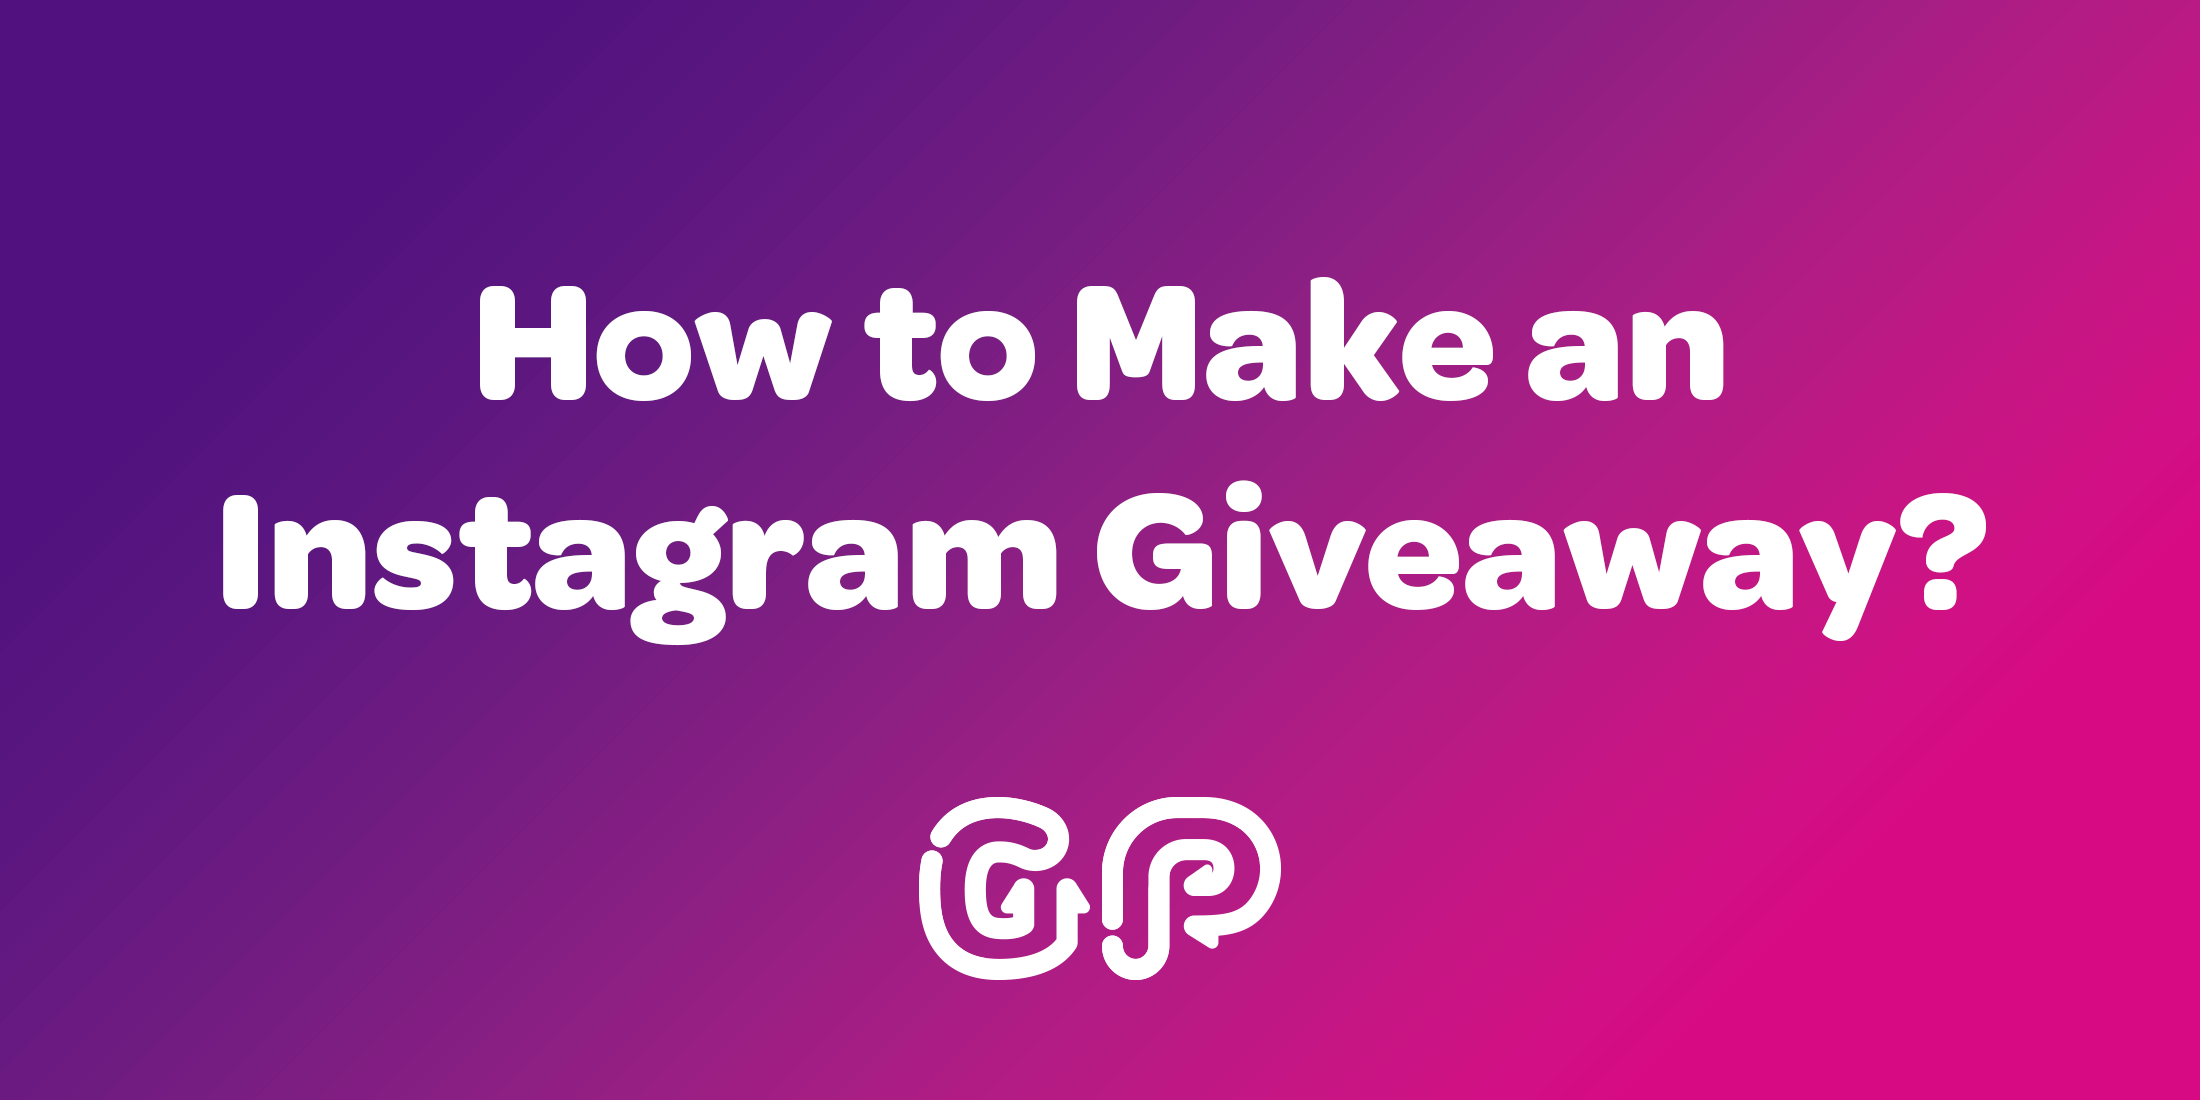 How to Make an Instagram Giveaway?